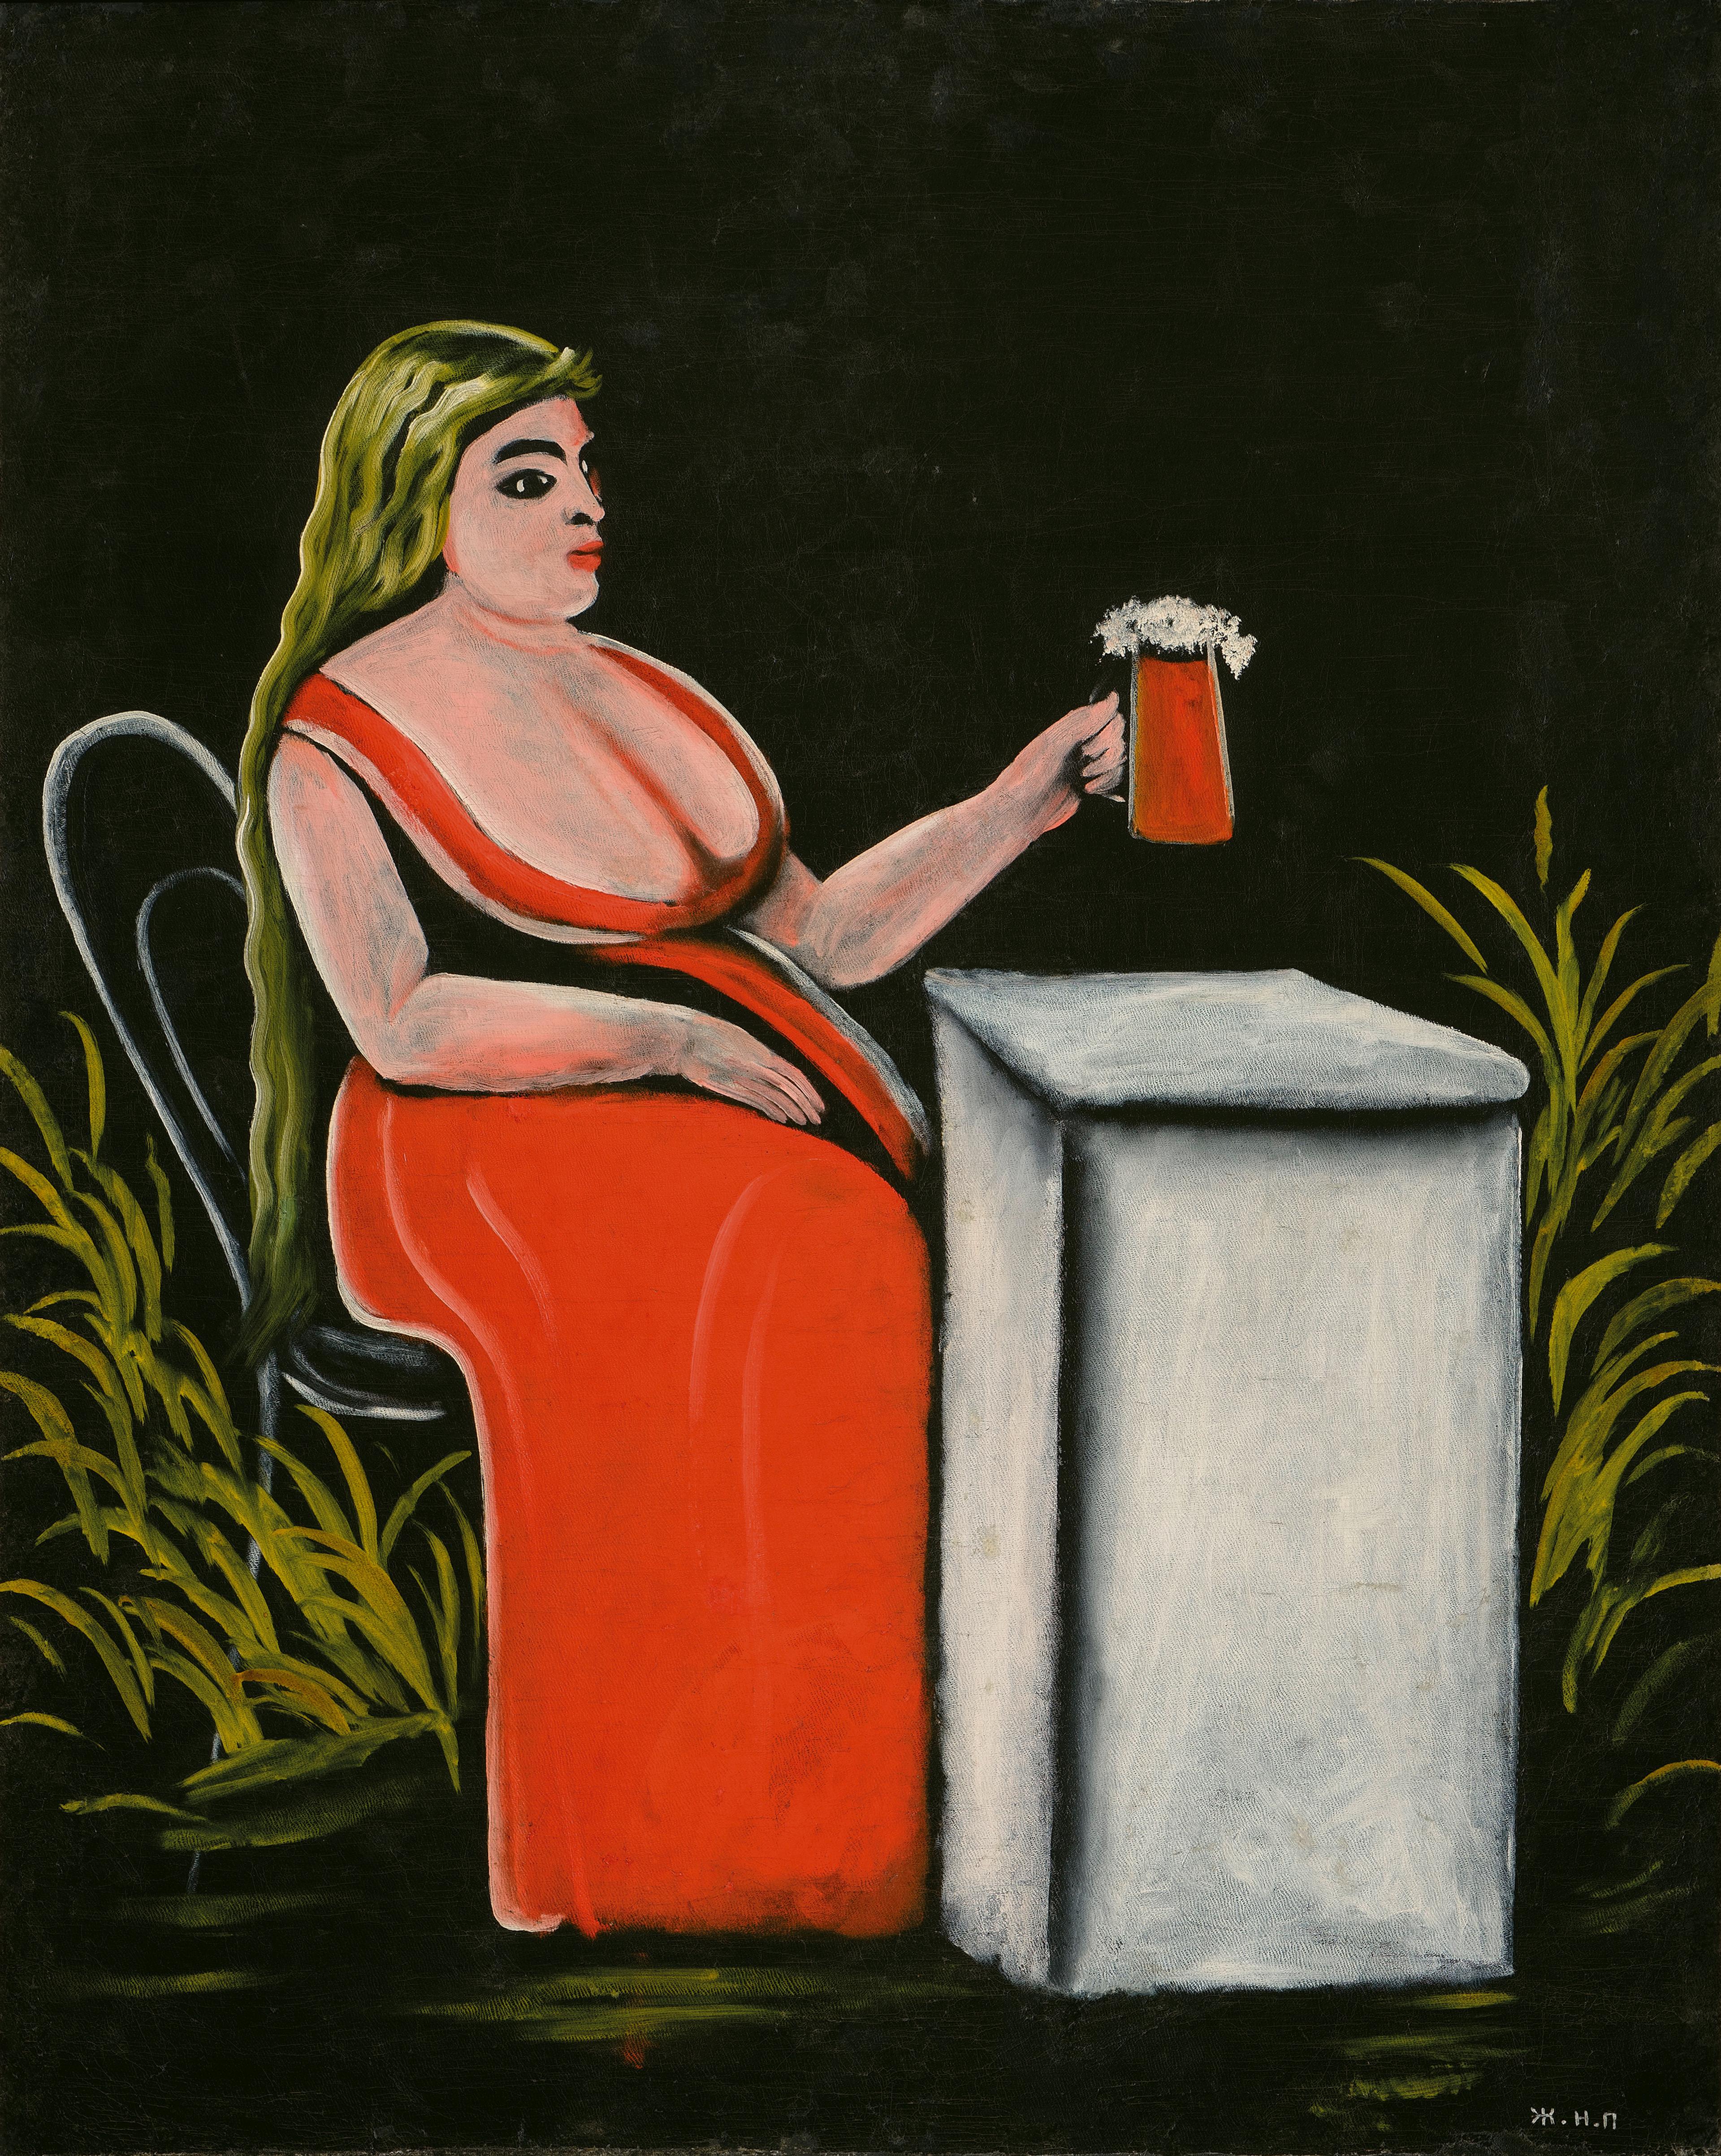 Woman with a Tankard of Beer, c. 1905, oil on oilcloth, 112.6 x 90 cm